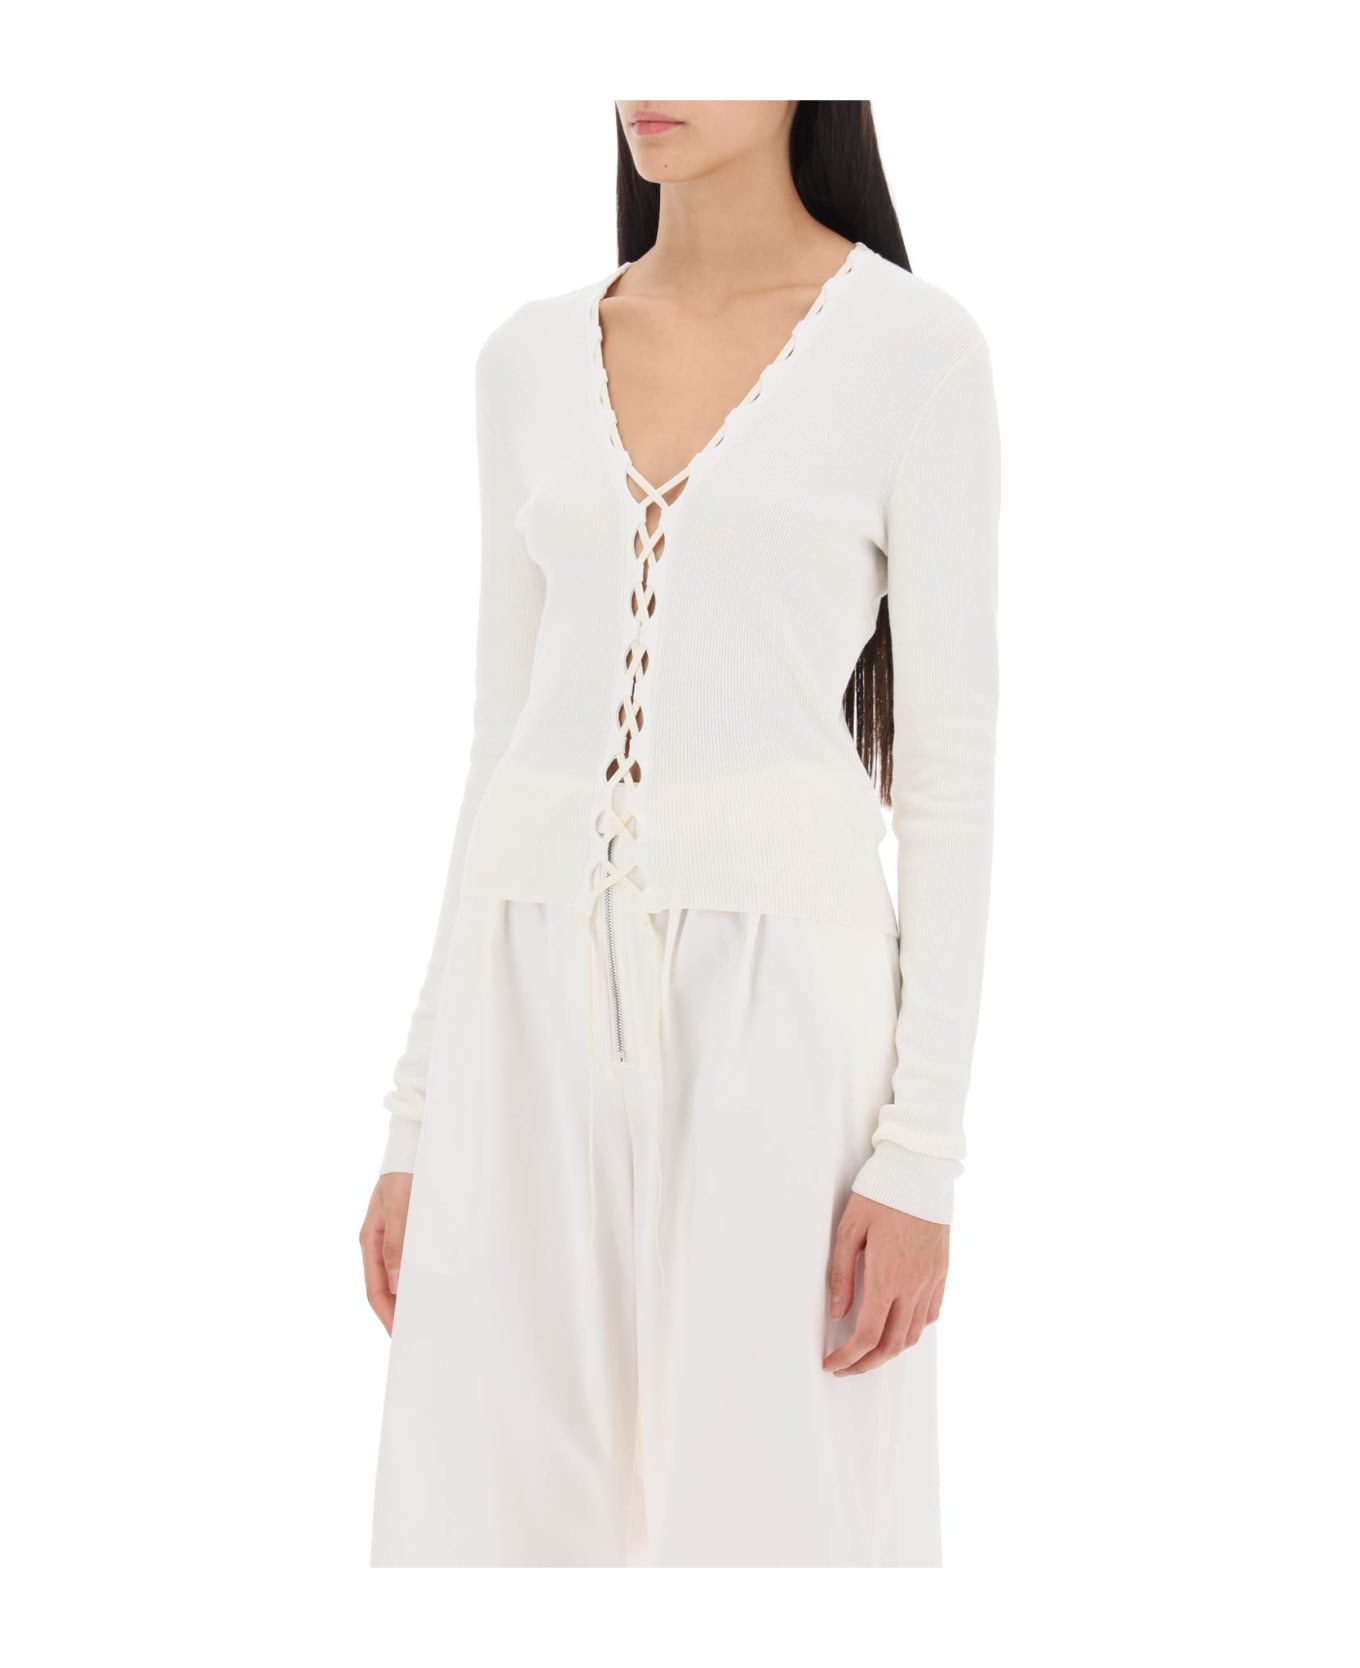 Dion Lee Lace-up Cardigan - WHITE CREAM (White)